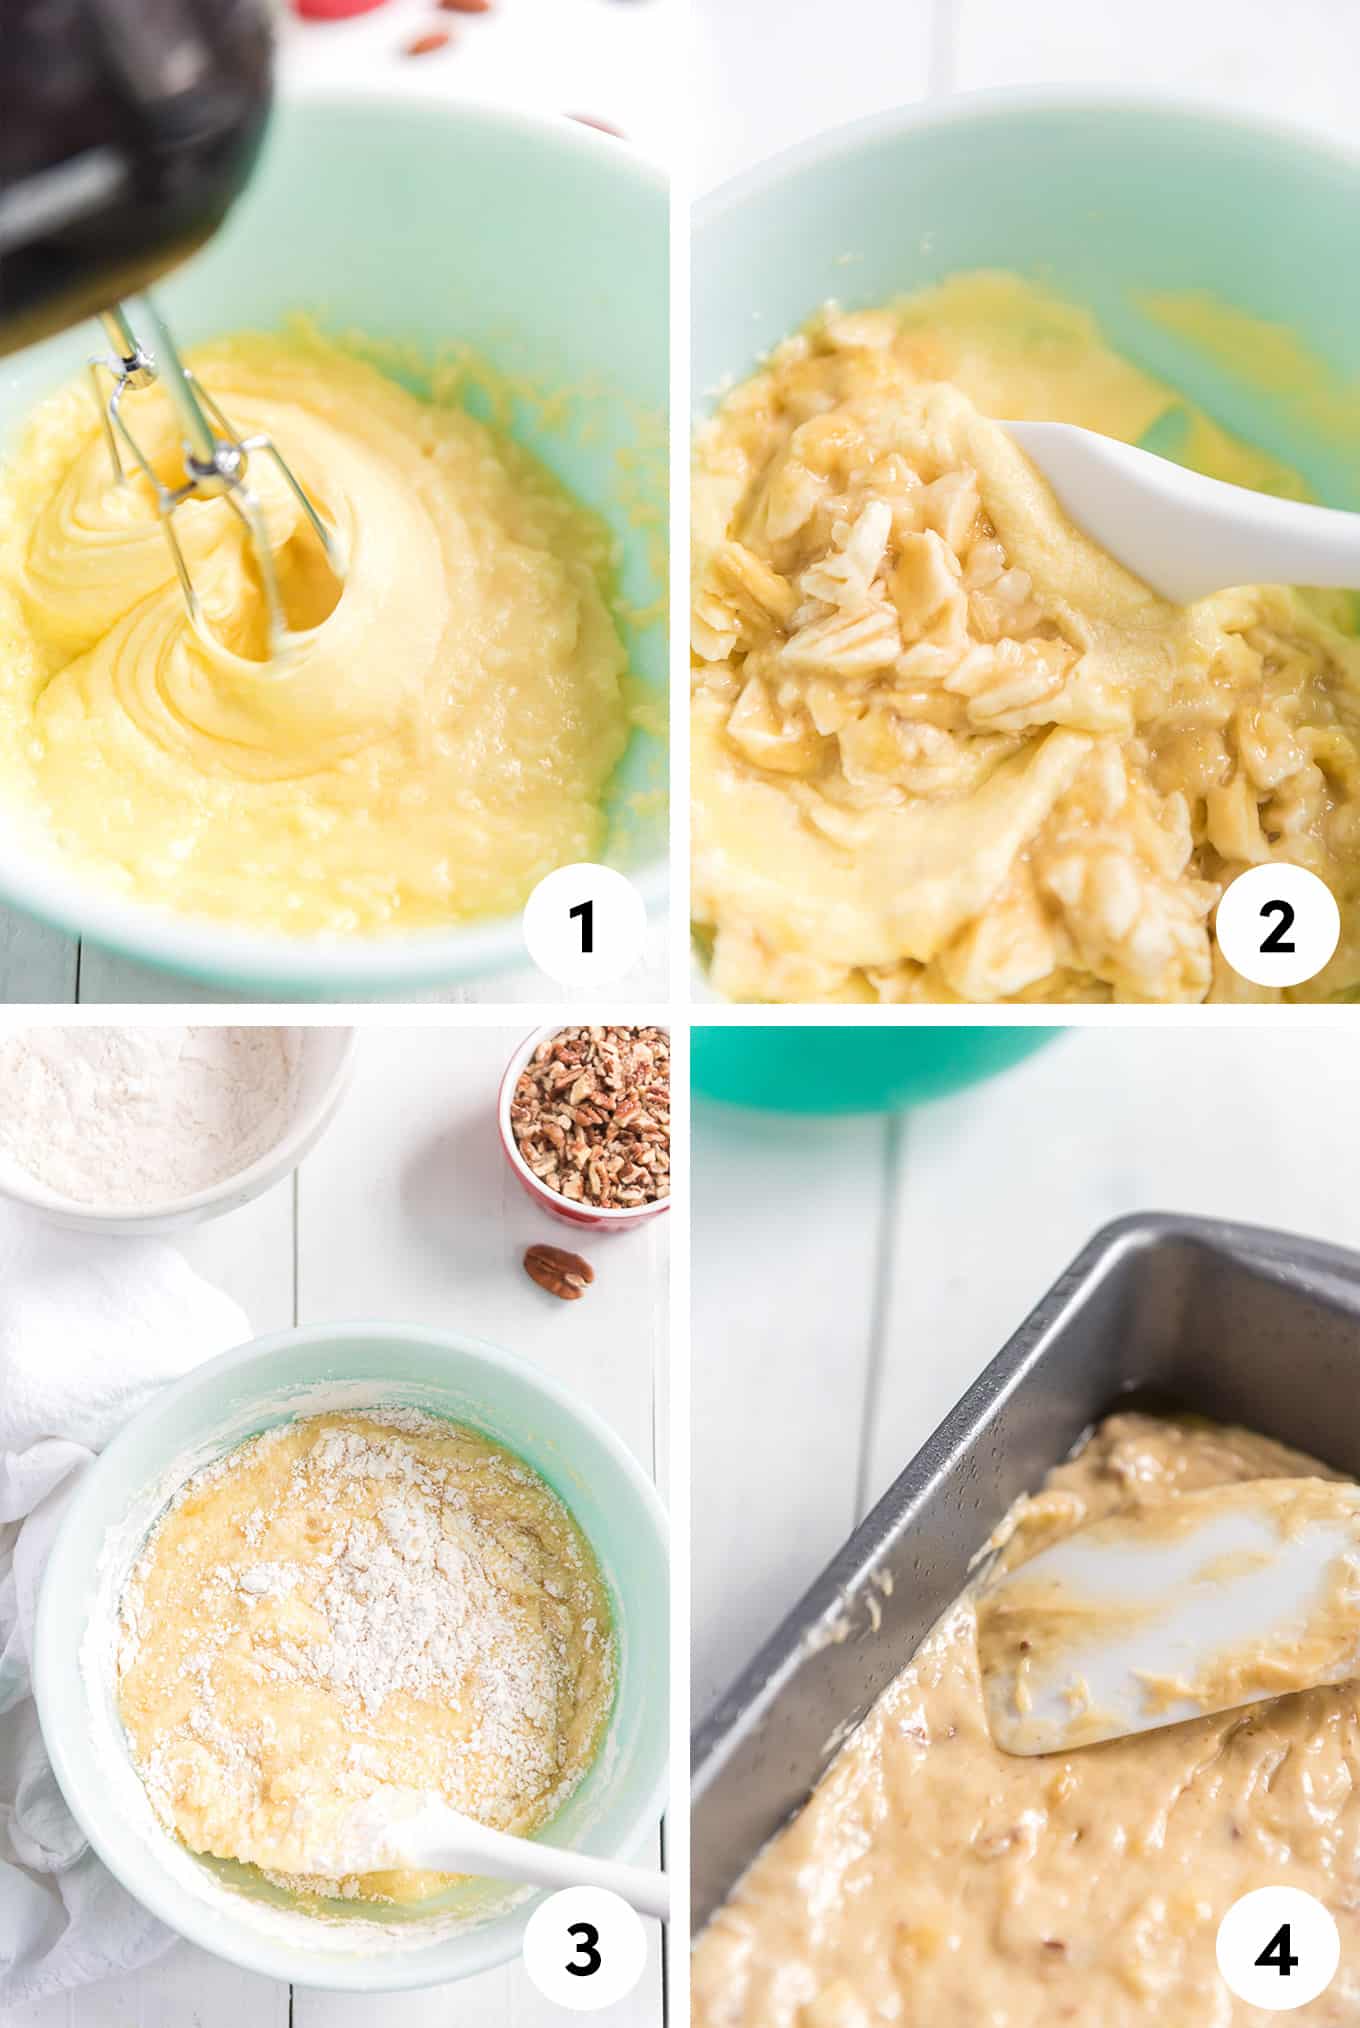 Step by step instructions for banana bread.